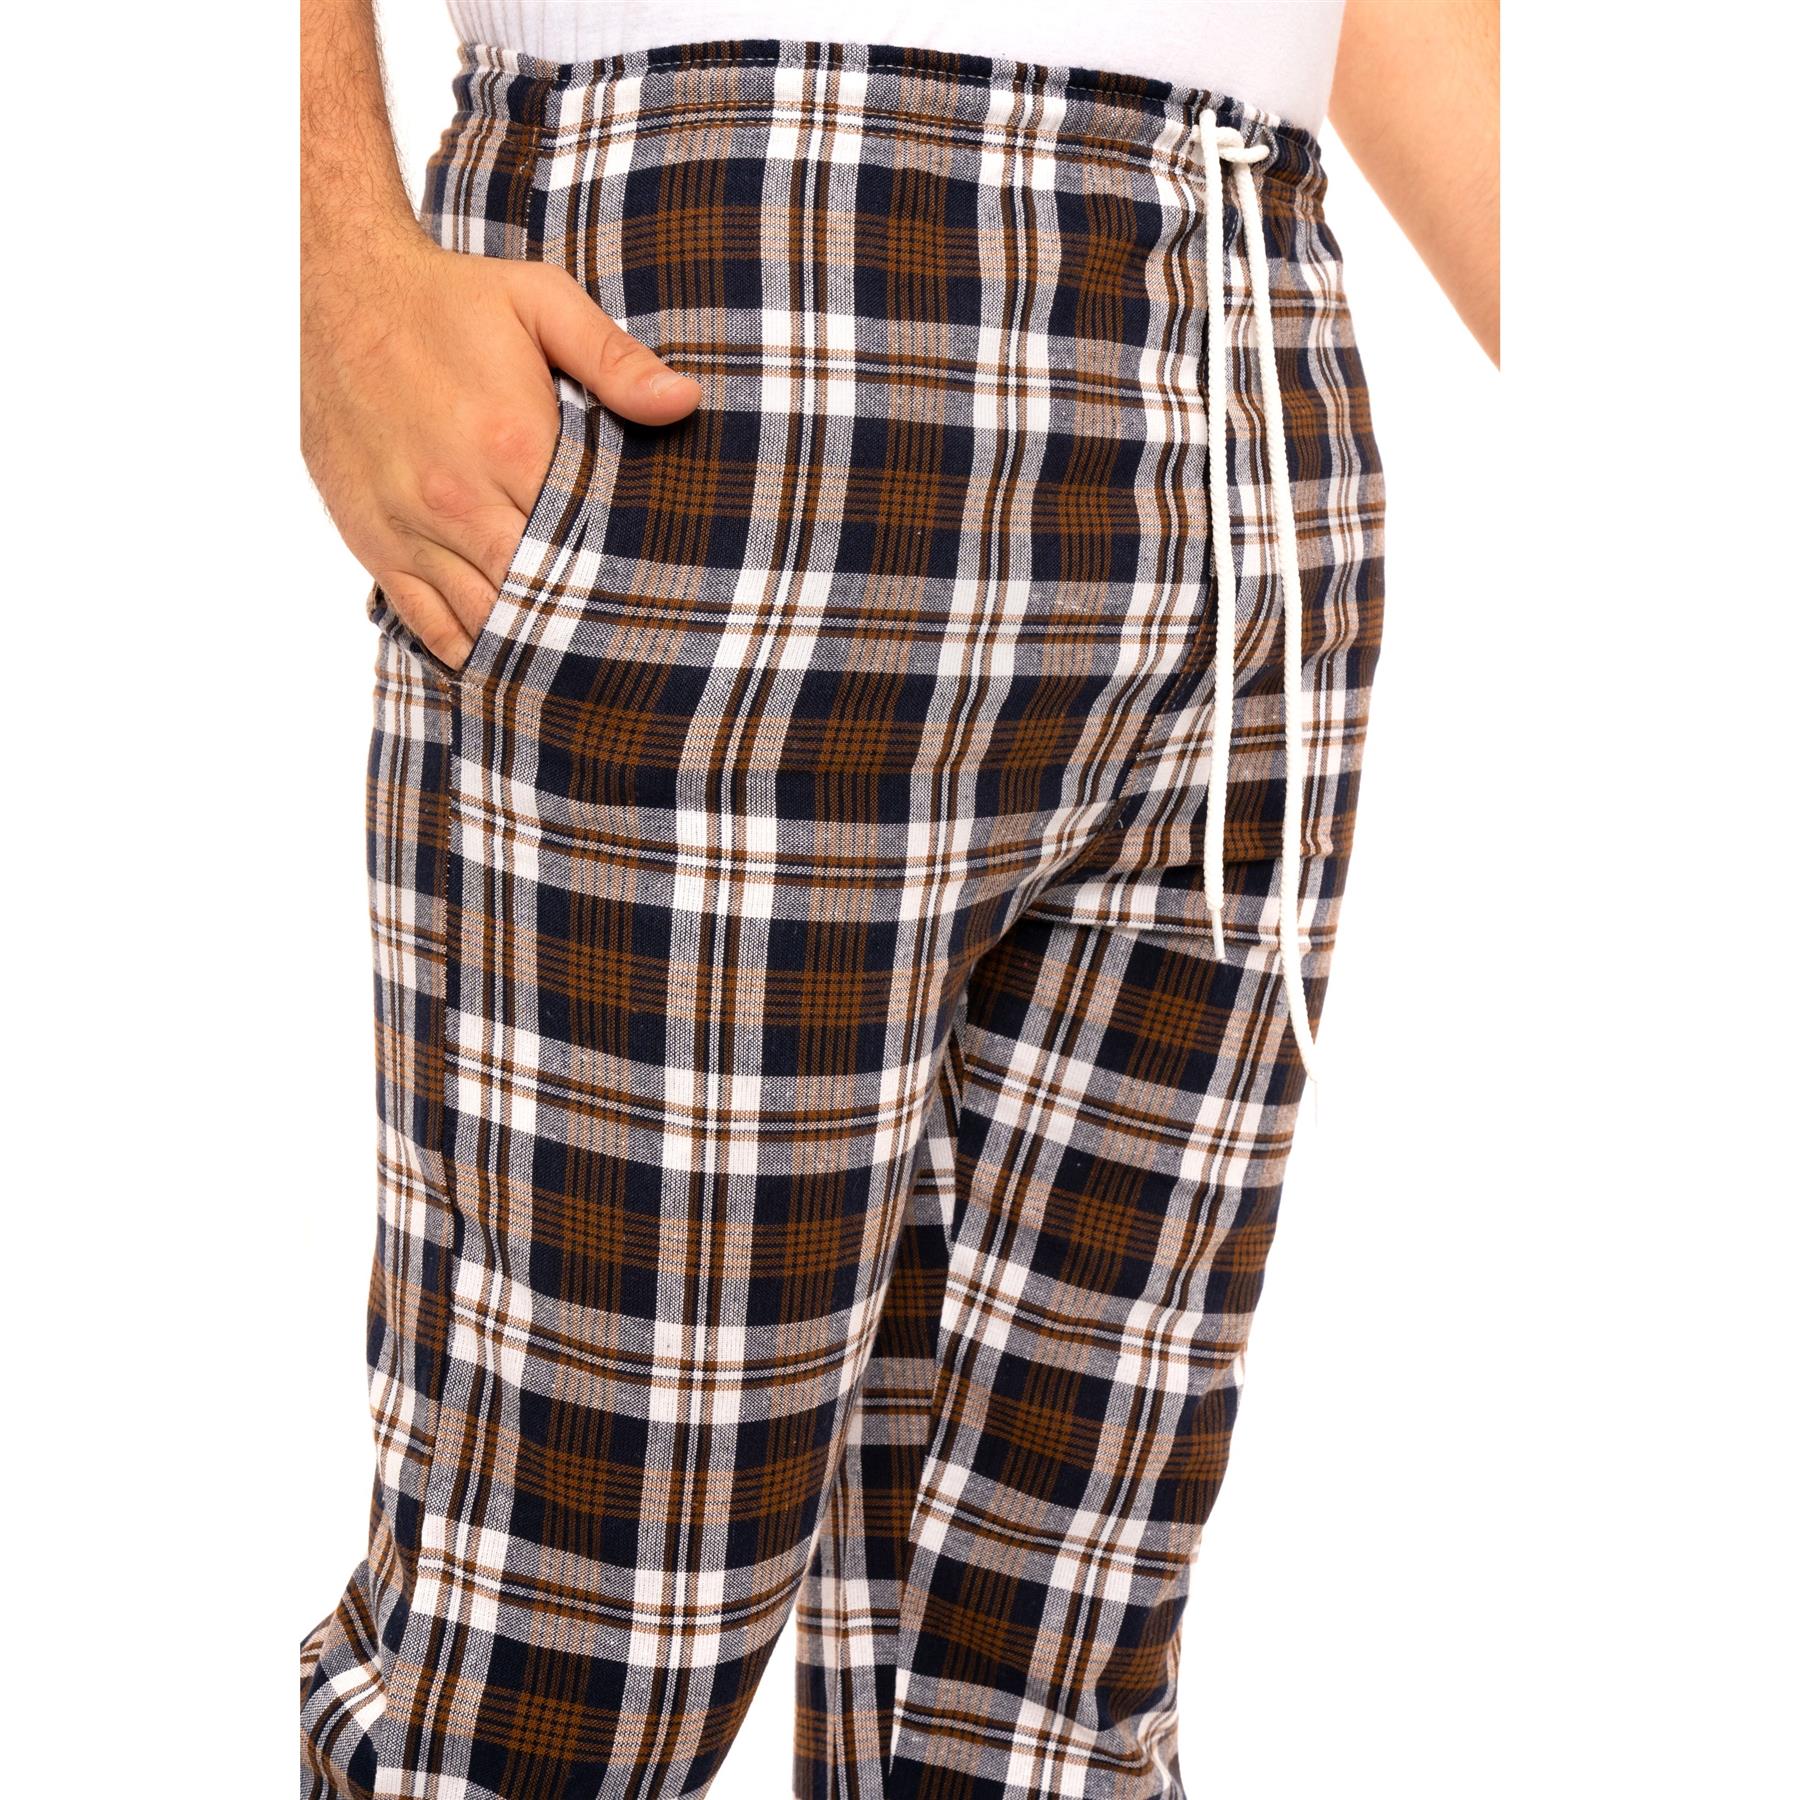 Blue/Red Woven Flannel Lounge Pants